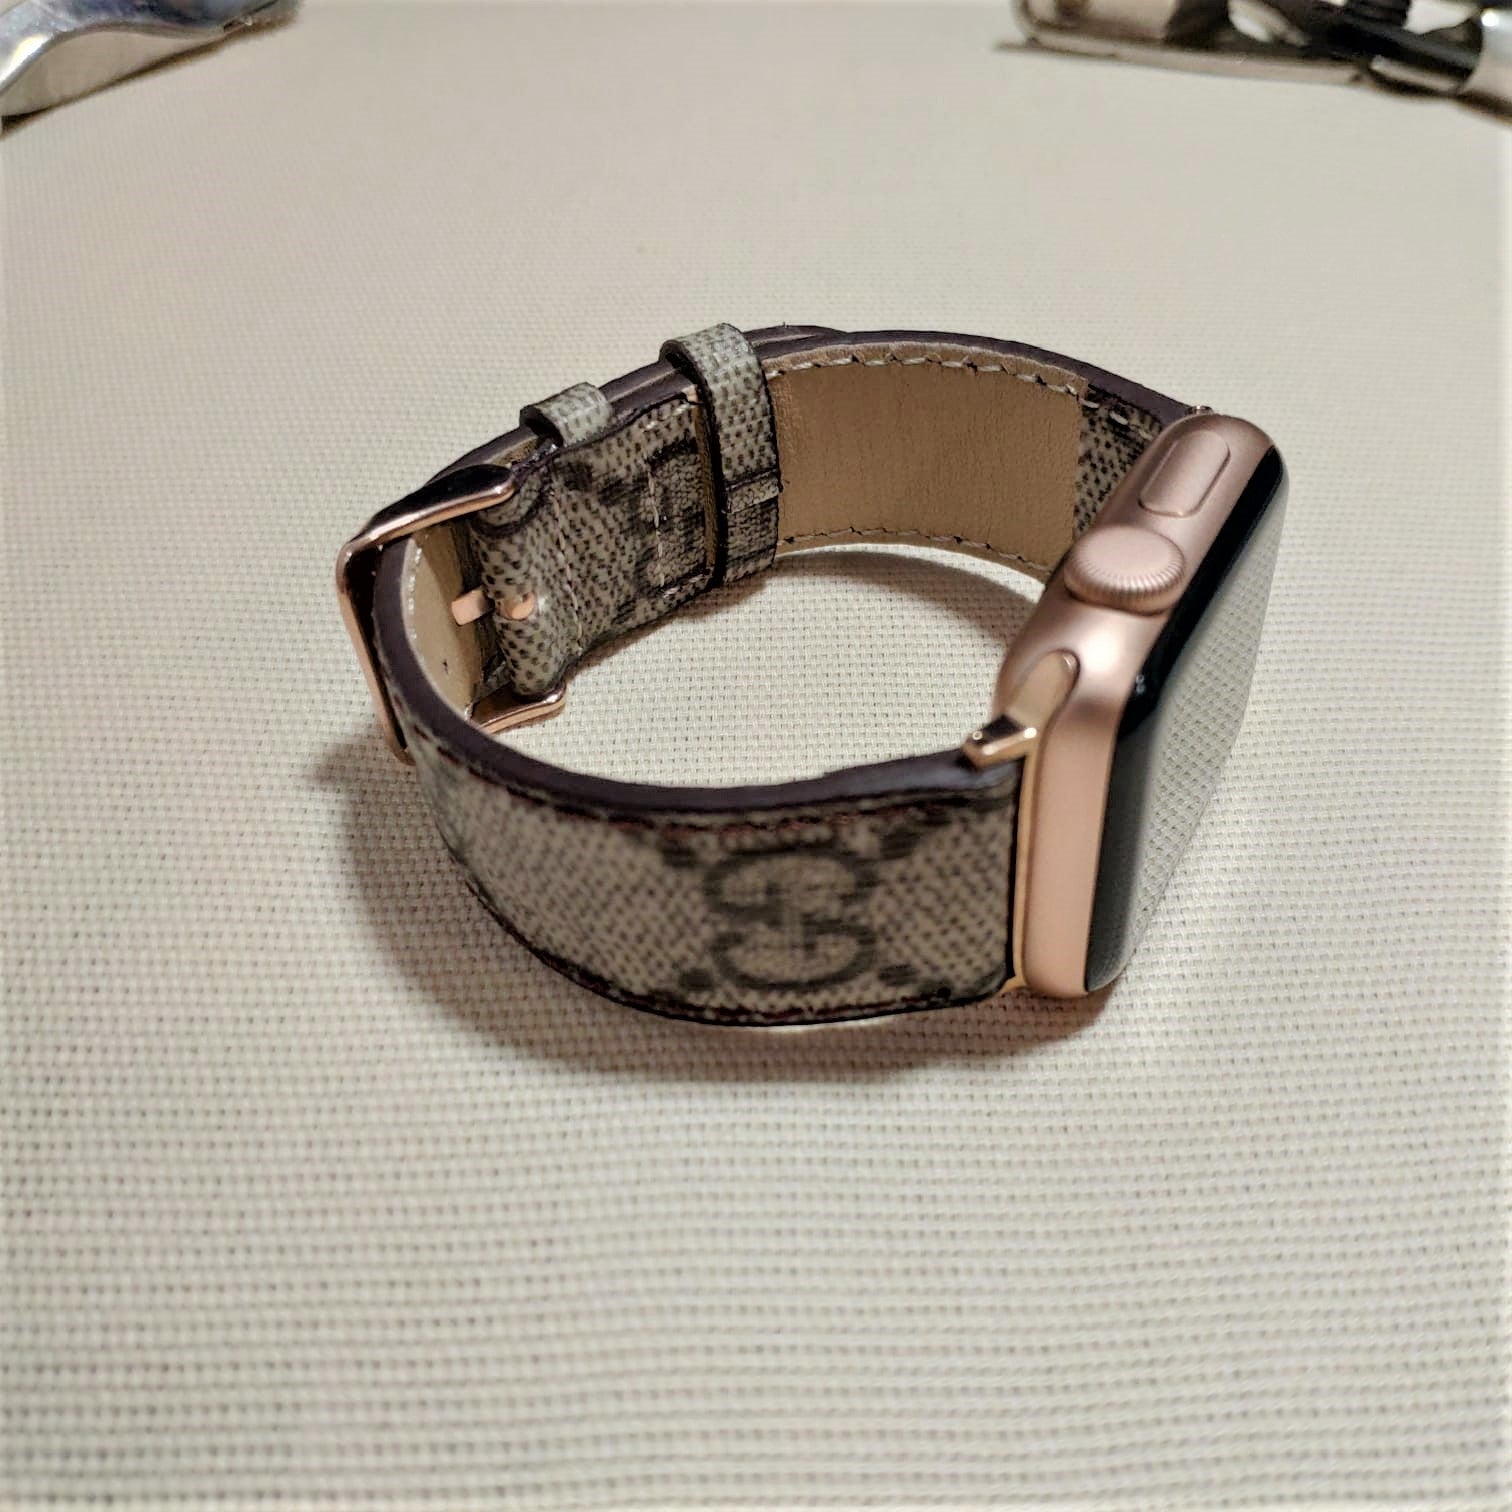 gucci floral apple watch band